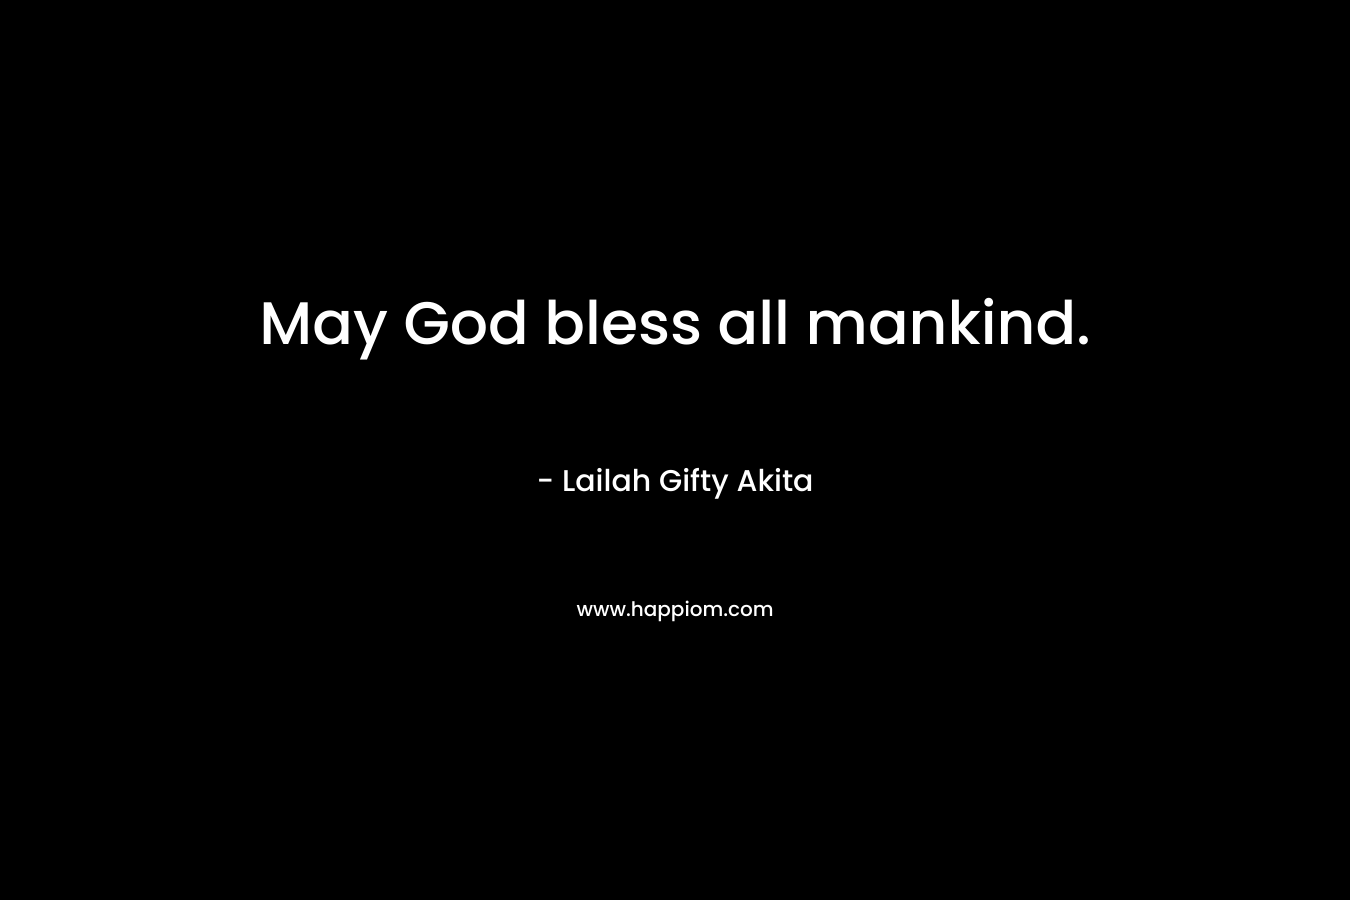 May God bless all mankind.